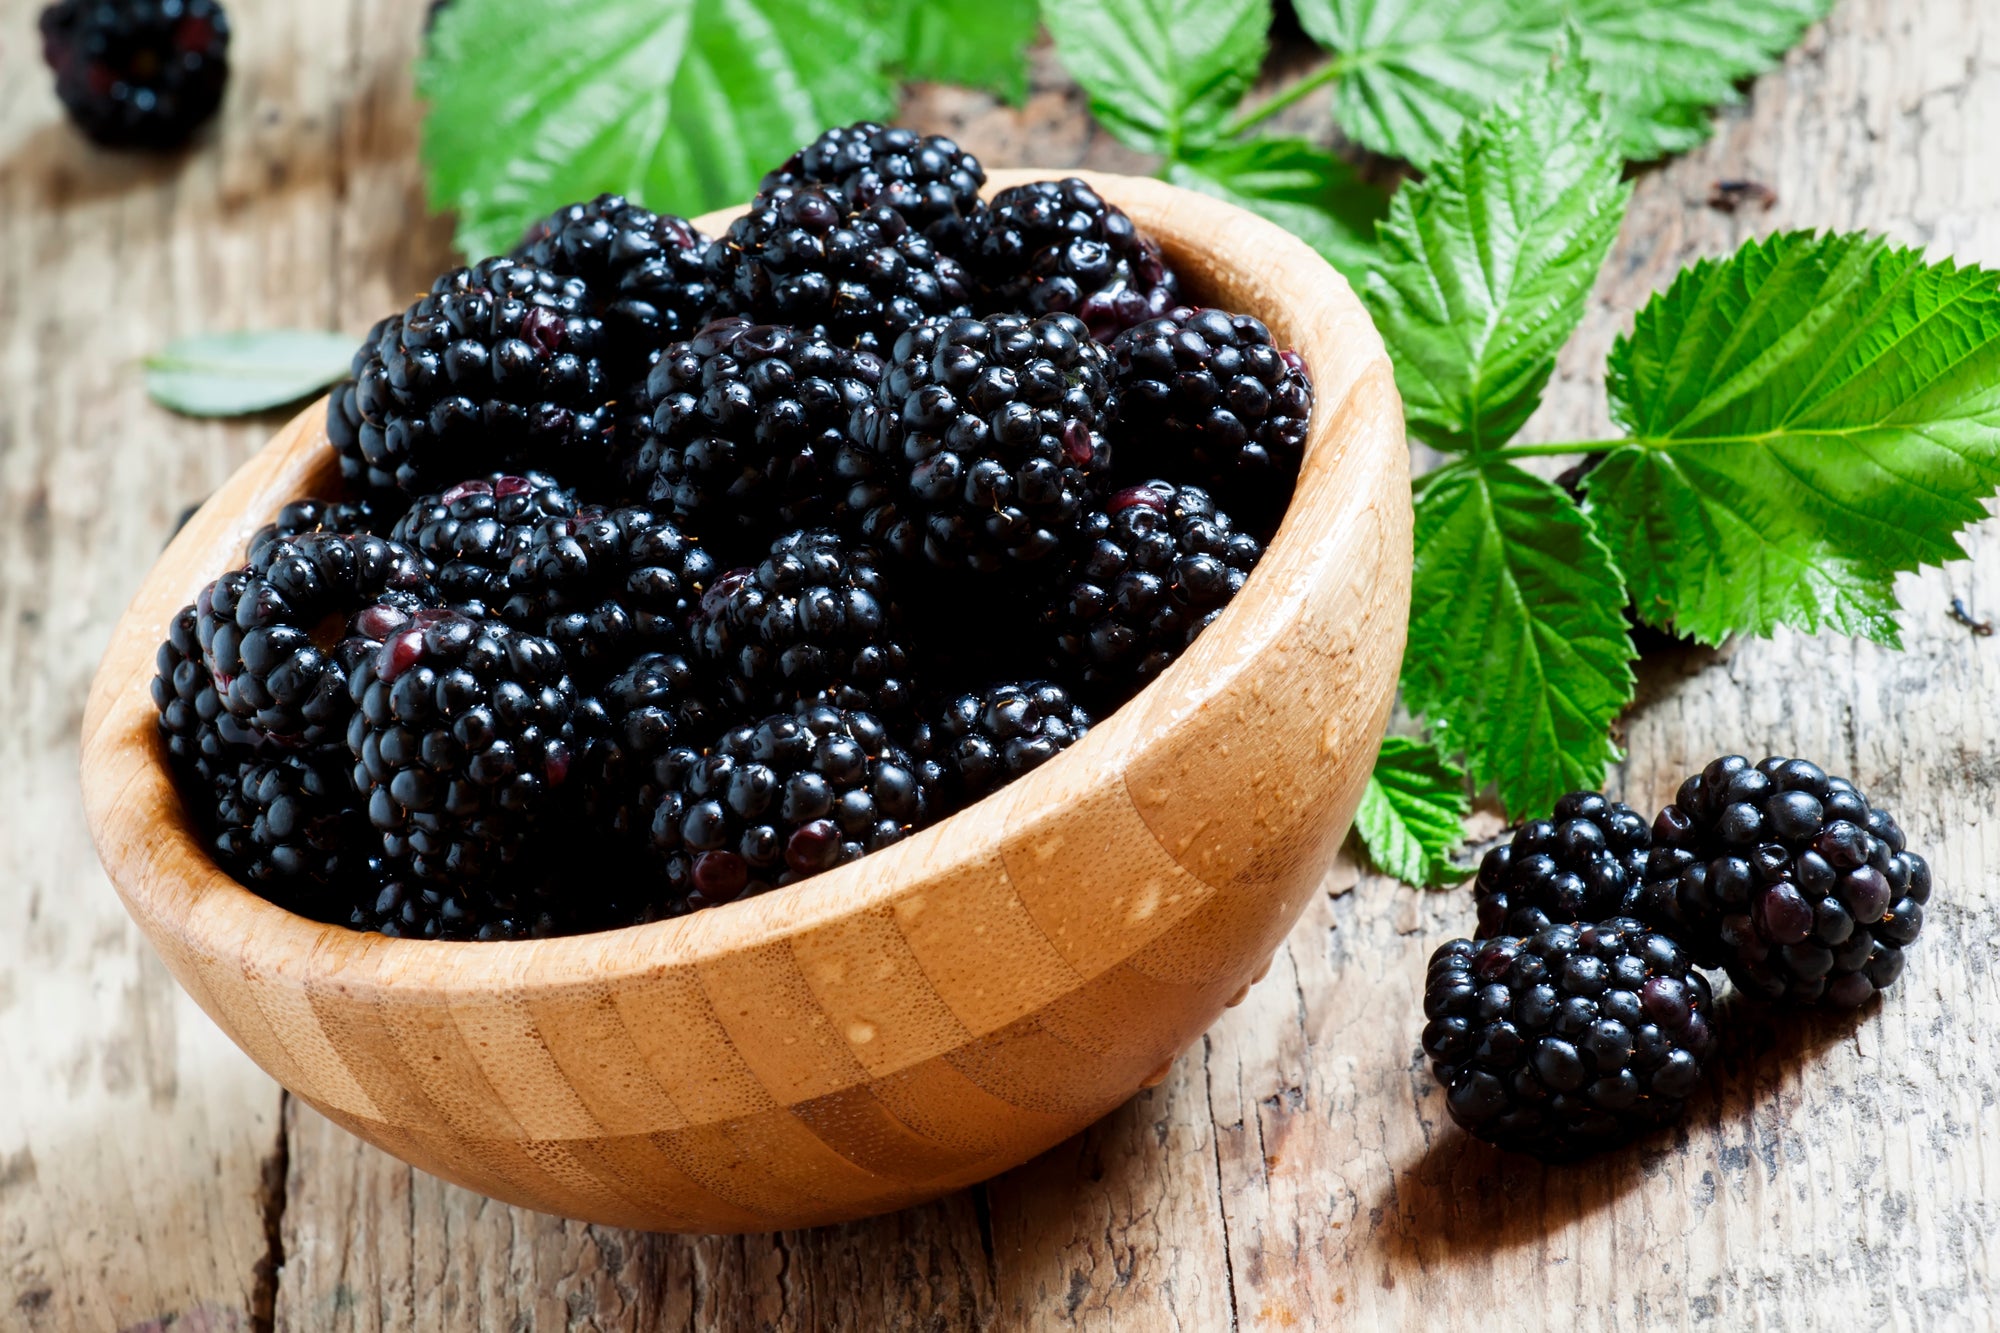 How To Make Mulberry Extract For Skin Sale Online | website.jkuat.ac.ke